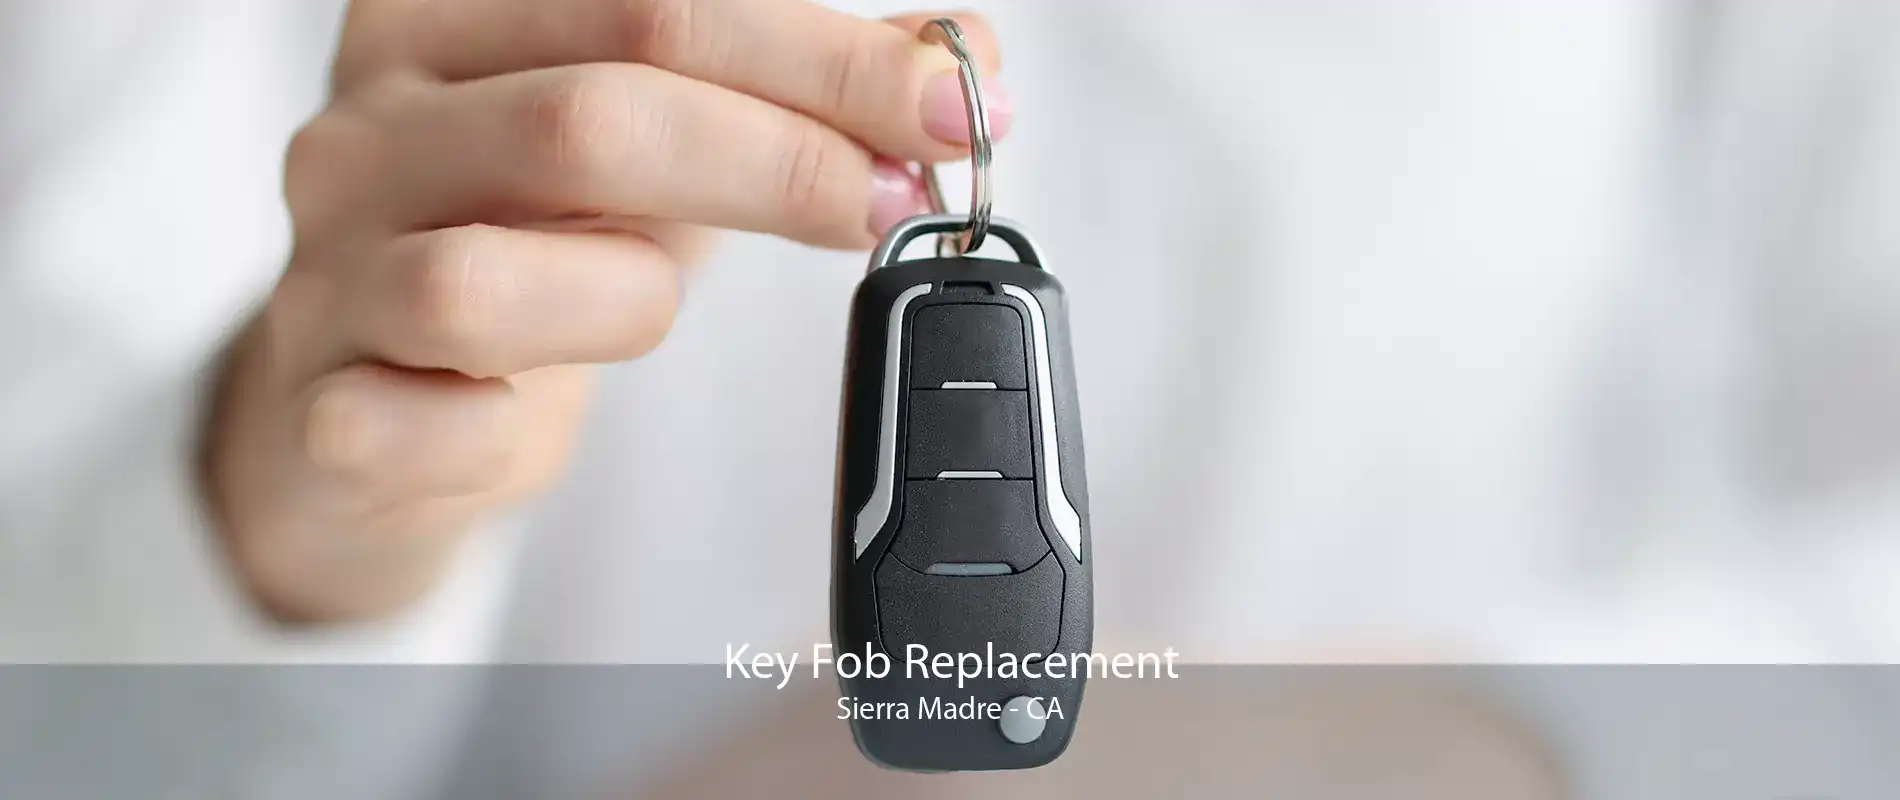 Key Fob Replacement Sierra Madre - CA